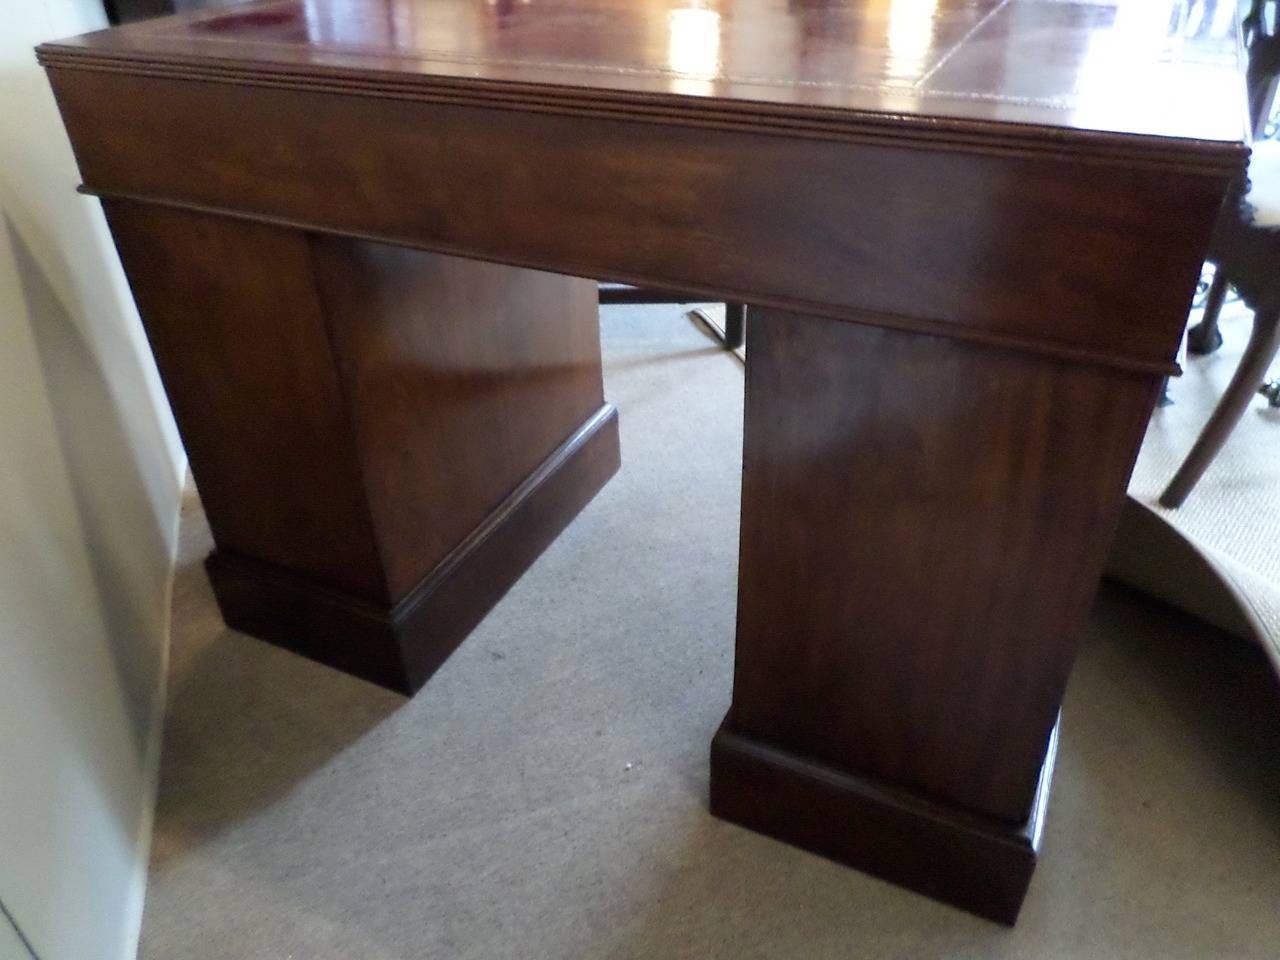 The desk is in three parts, so it is easy to move. The overhanging tooled red leather top has three working drawers and rests on two pedestal bases. The pedestal on the right has a double drawer at the bottom, good for files. Brasses are original